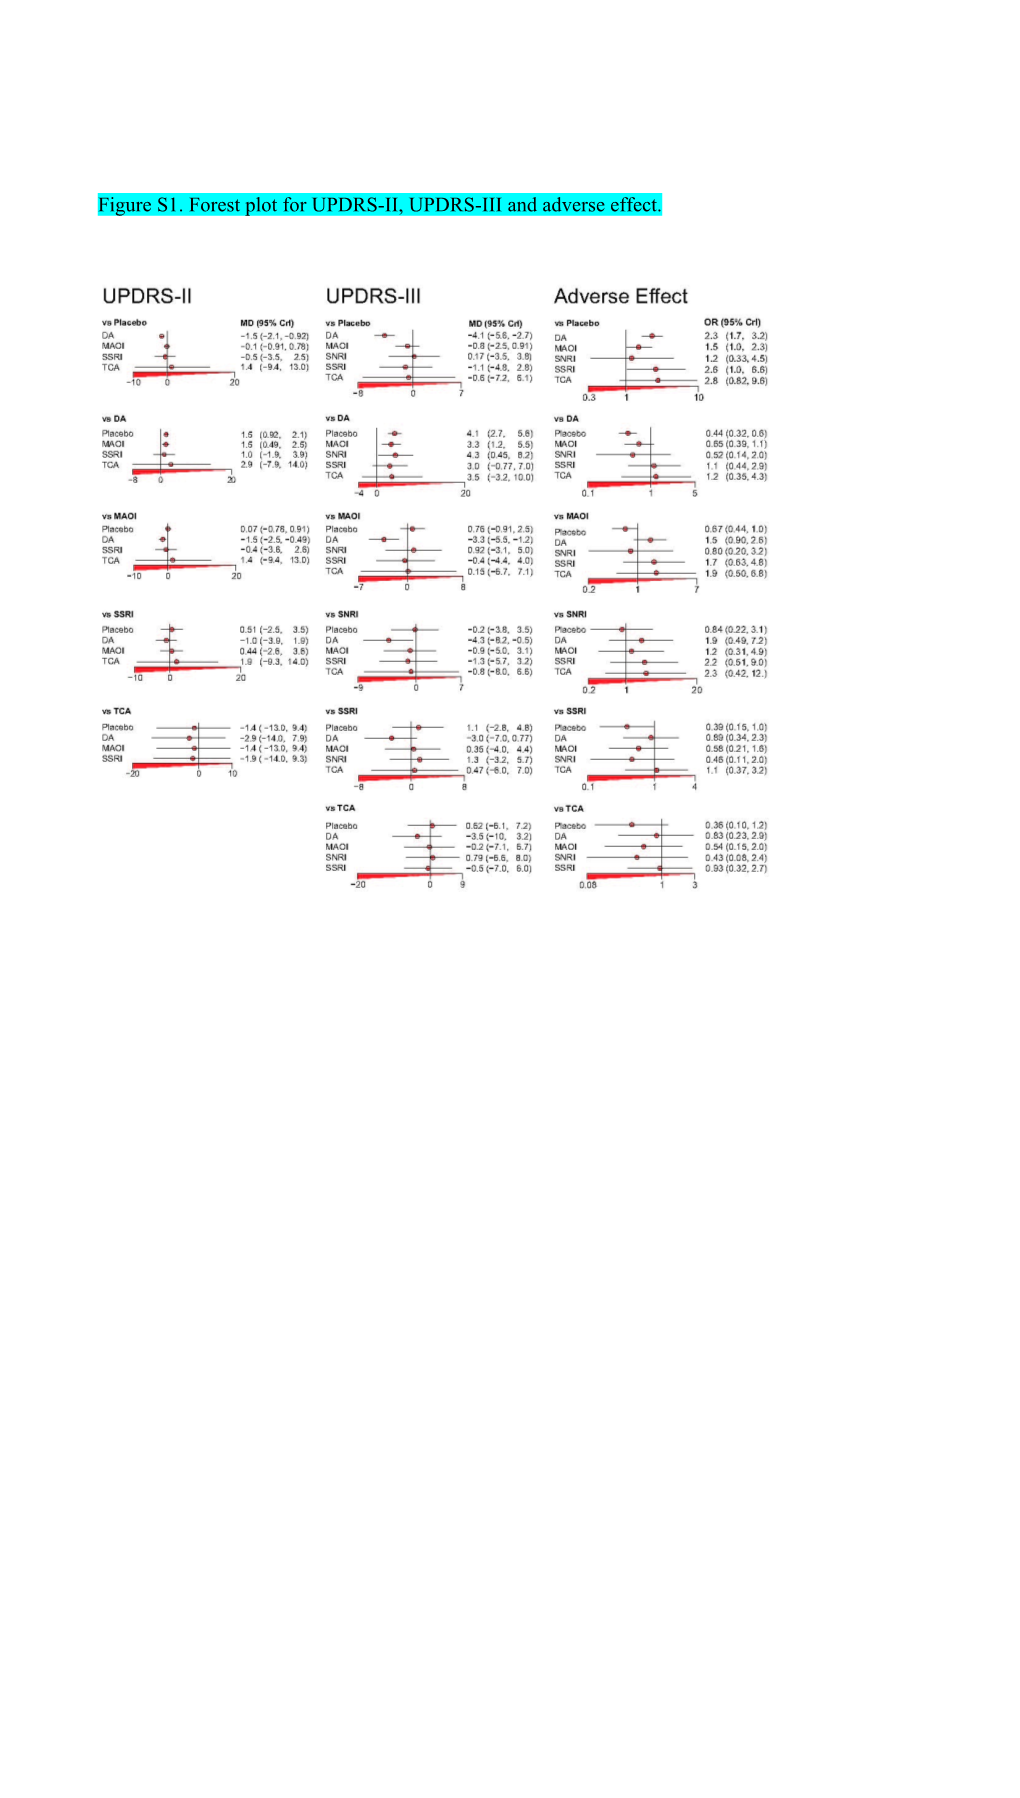 Figure S1. Forest Plot for UPDRS-II, UPDRS-III and Adverse Effect